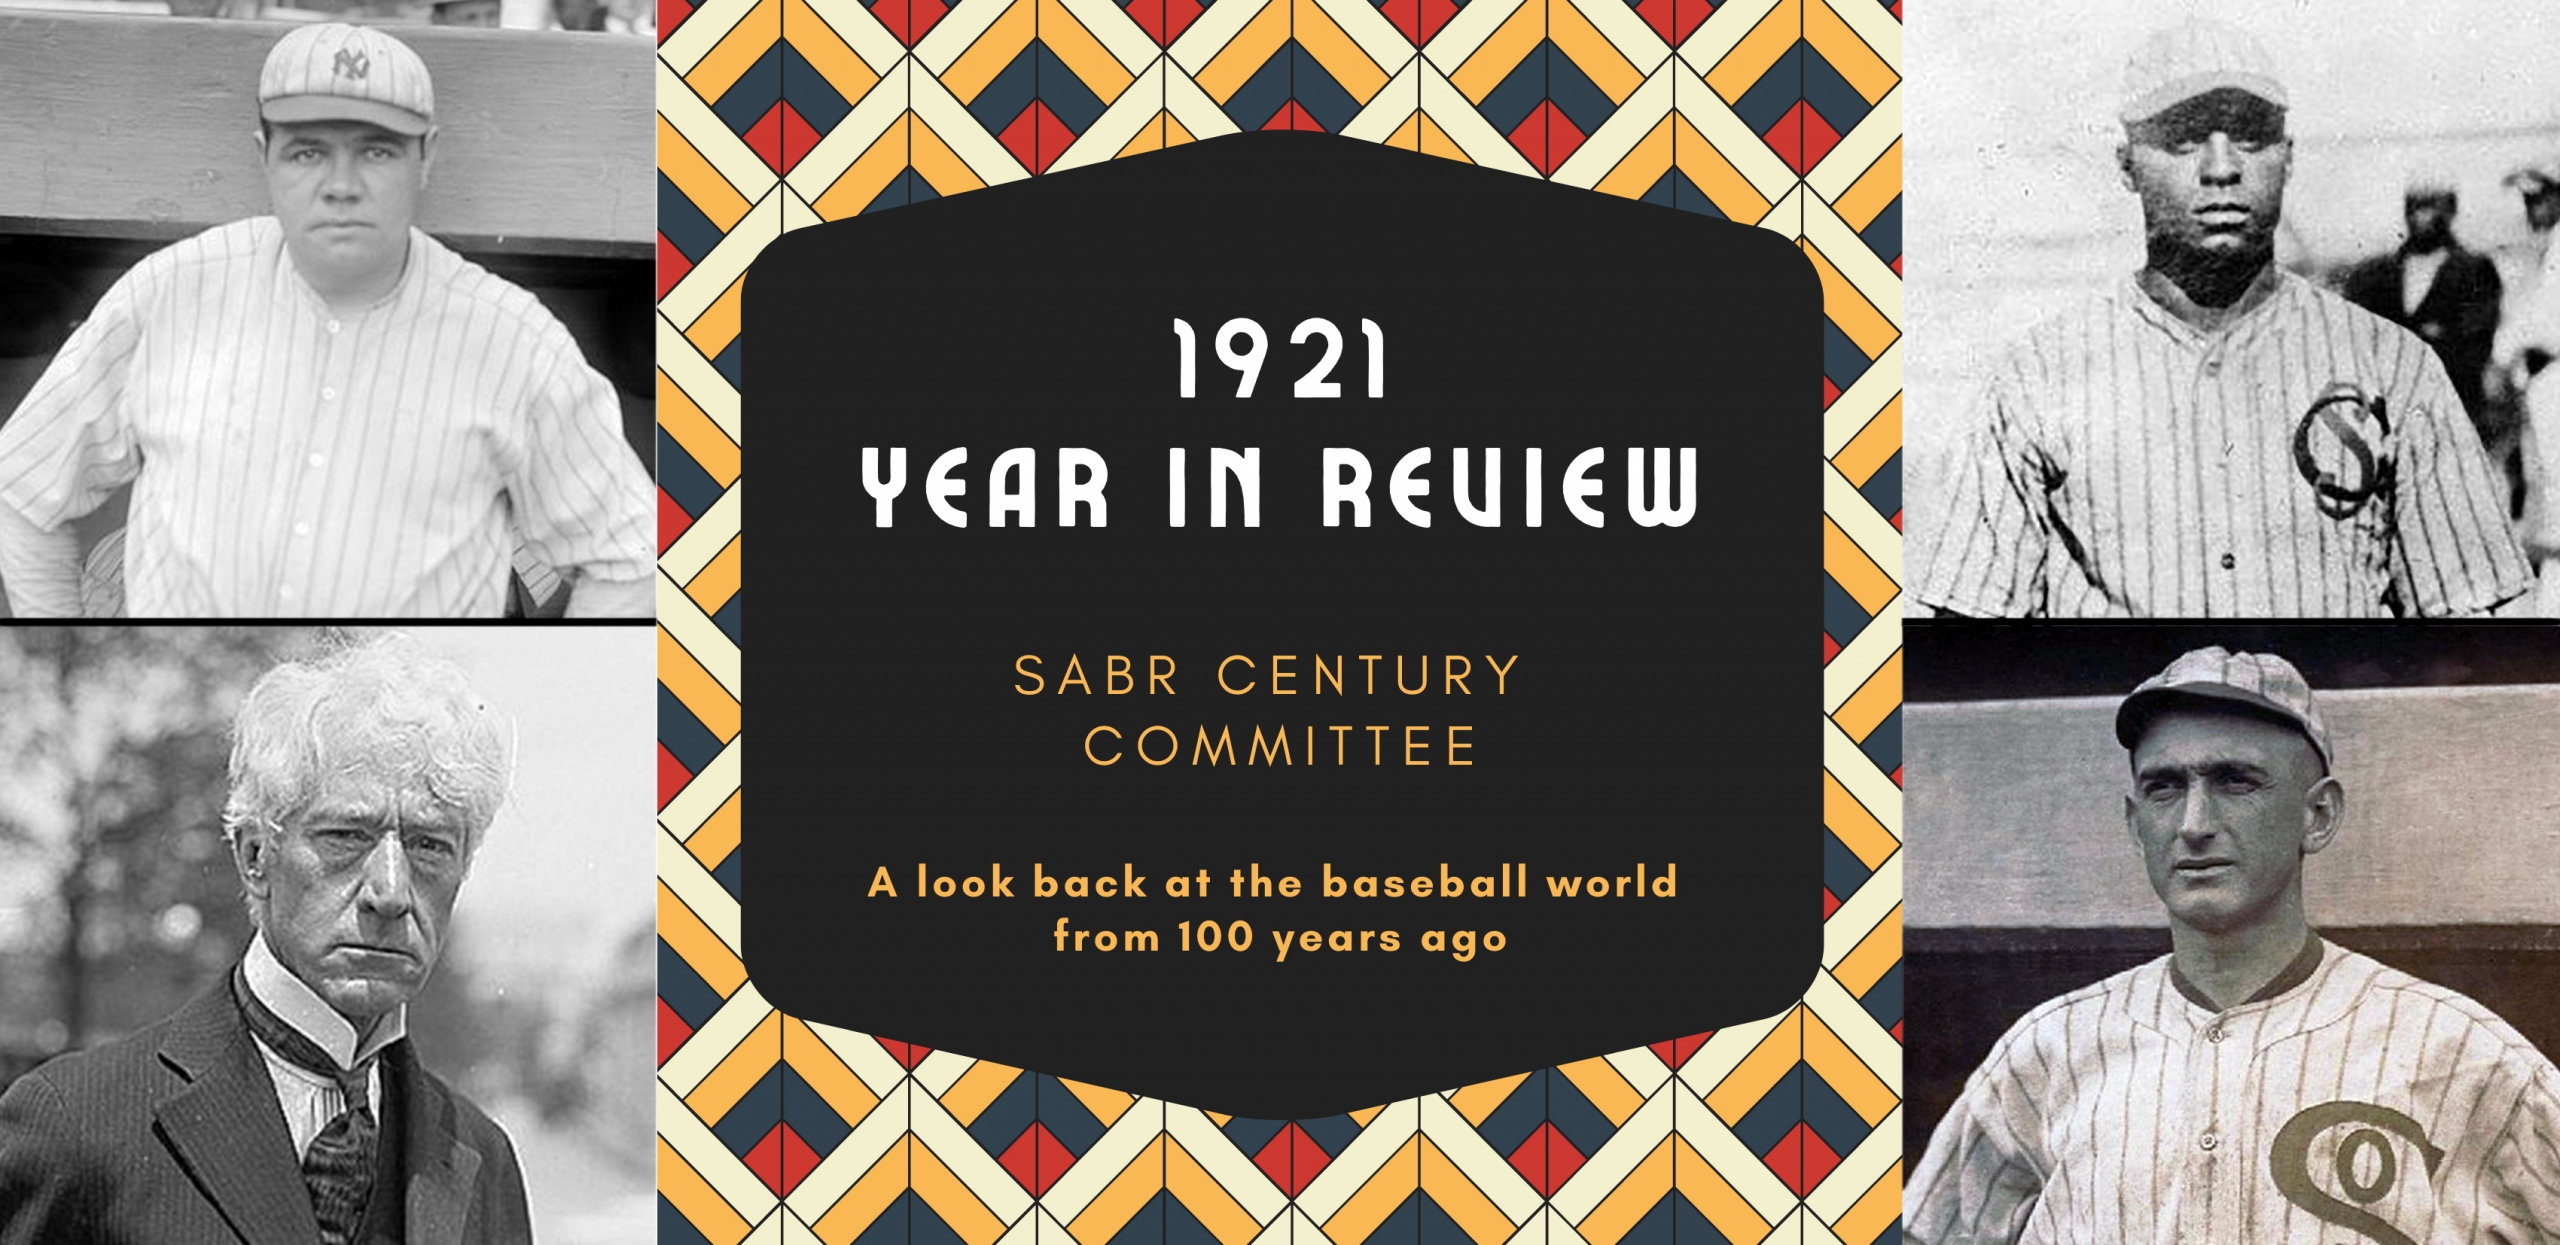 SABR Century: 1921 Year in Review